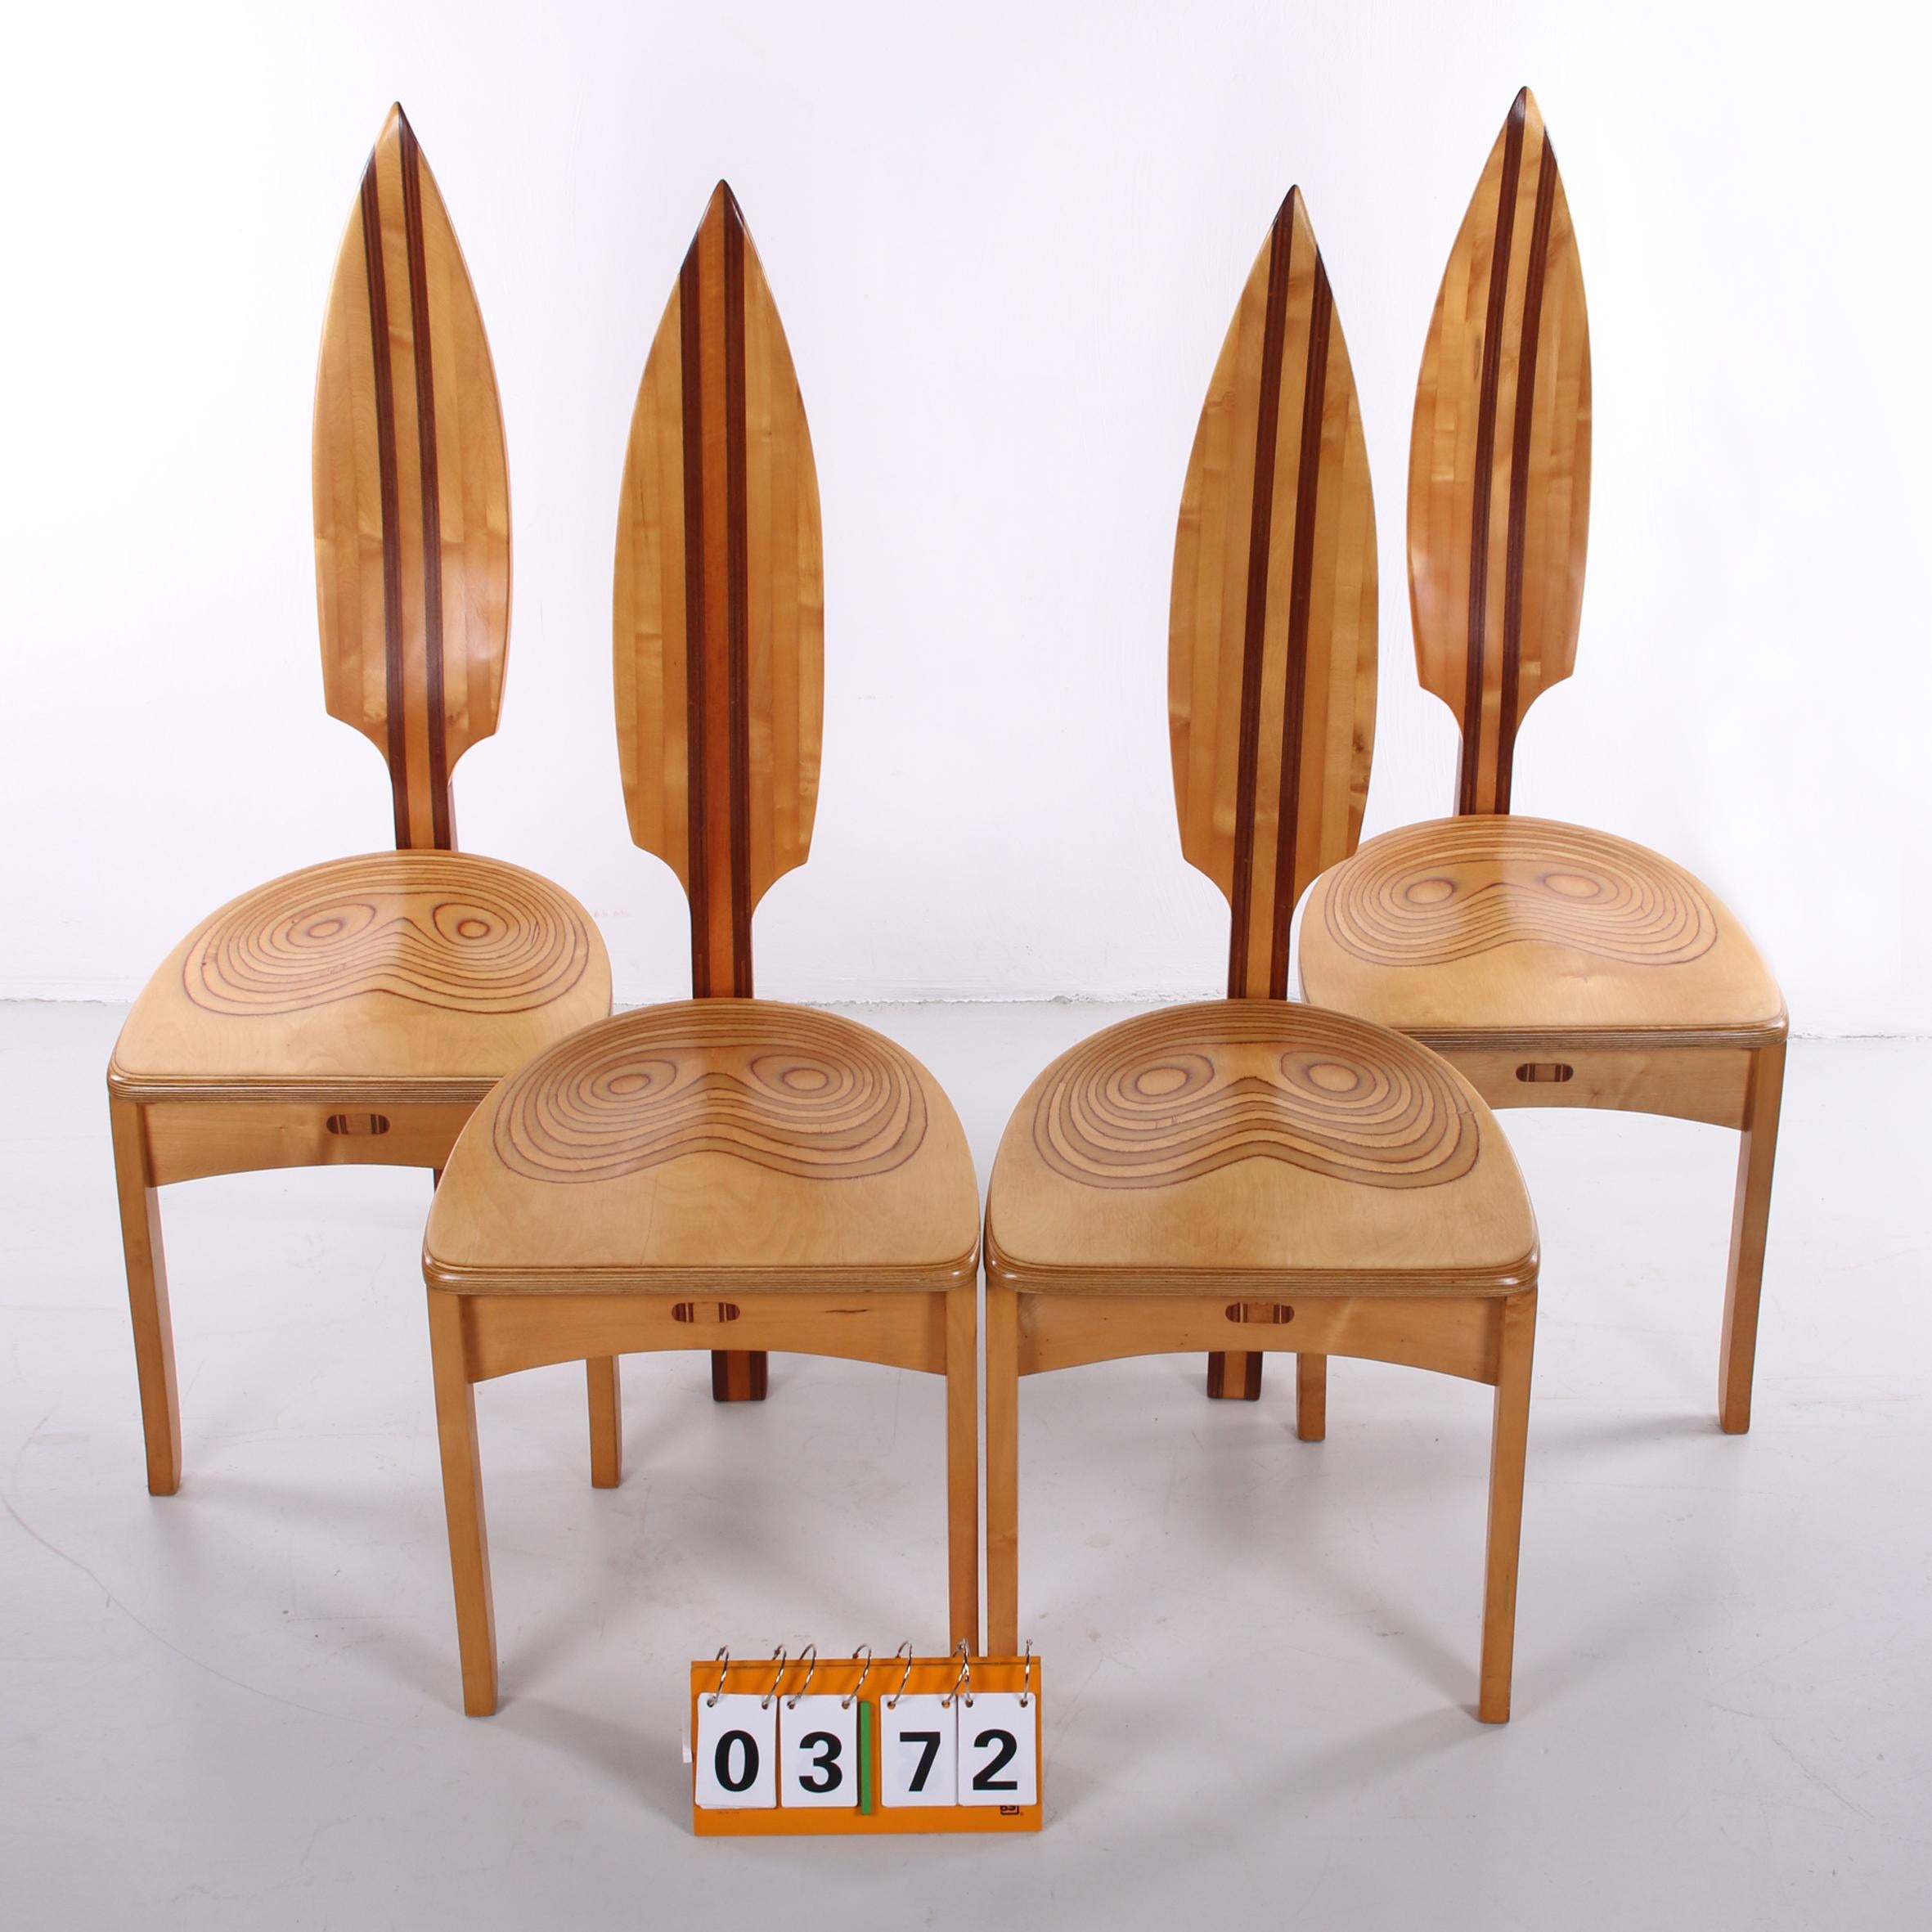 Late 20th Century Set of 4 David Haig Dining Table Chairs Made of Beech Wood Model Vedder, 70s